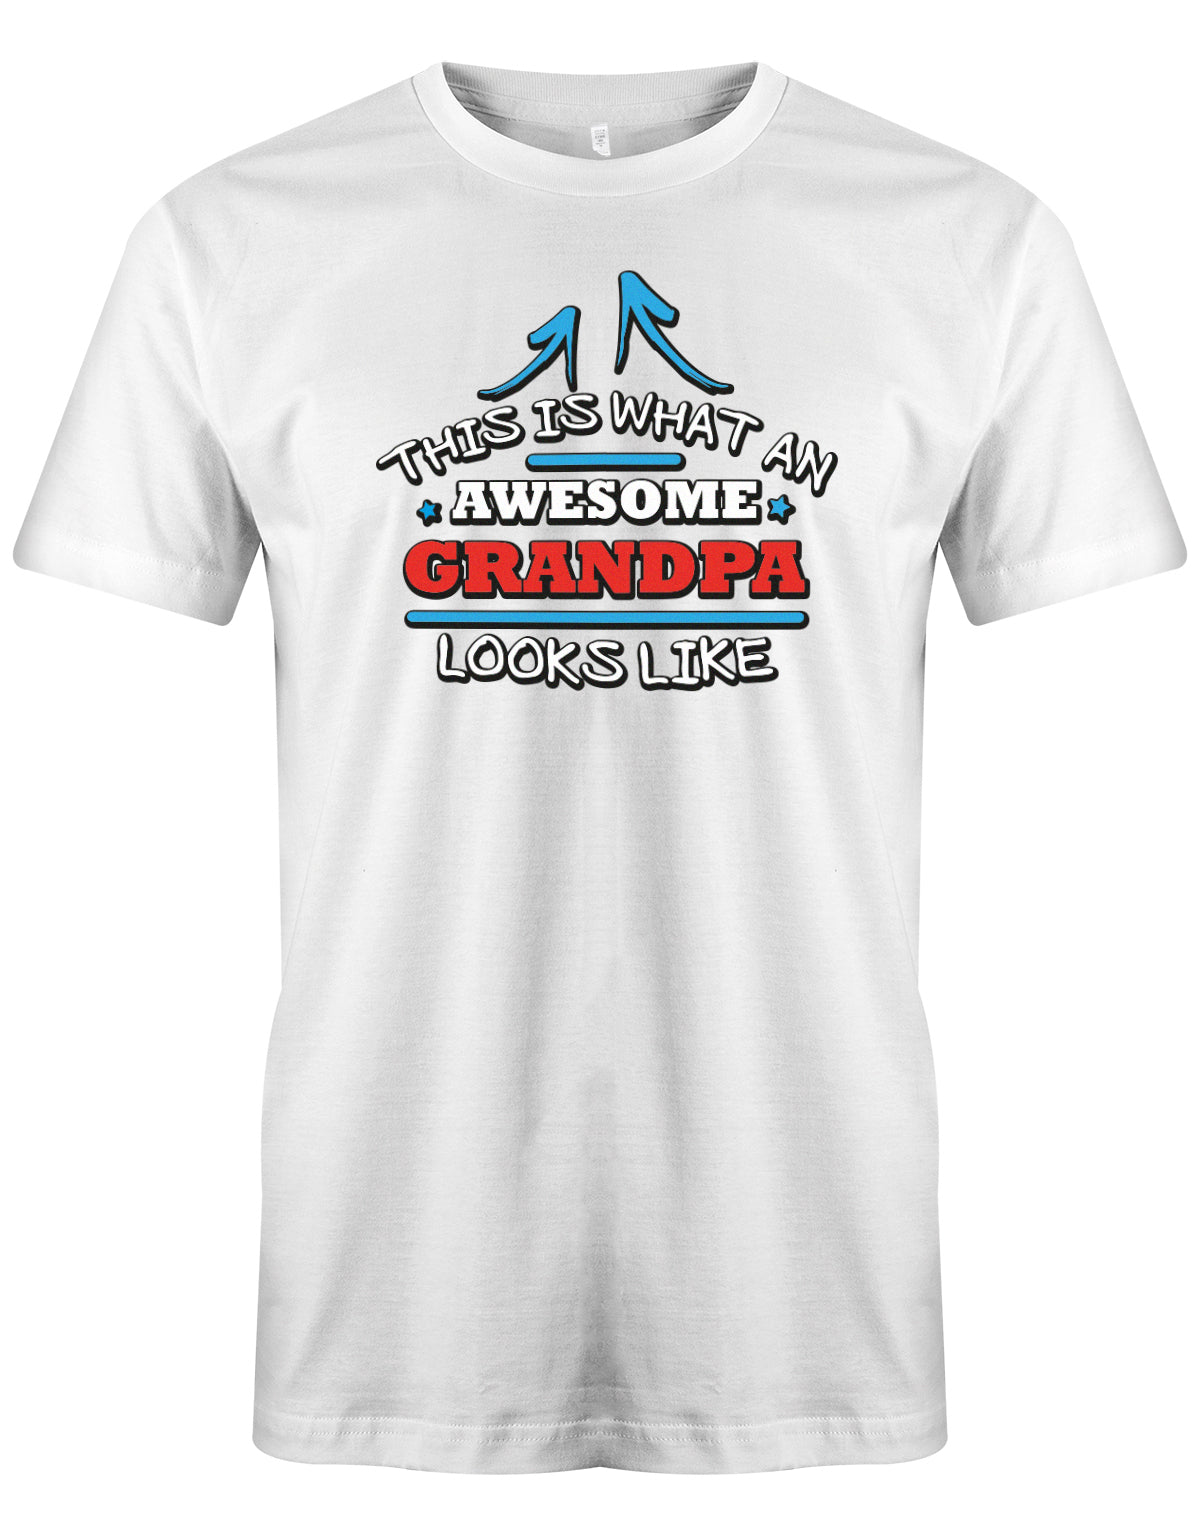 Opa T-Shirt – This is what an awesome Grandpa looks like. So sieht ein toller Opa aus. Weiss